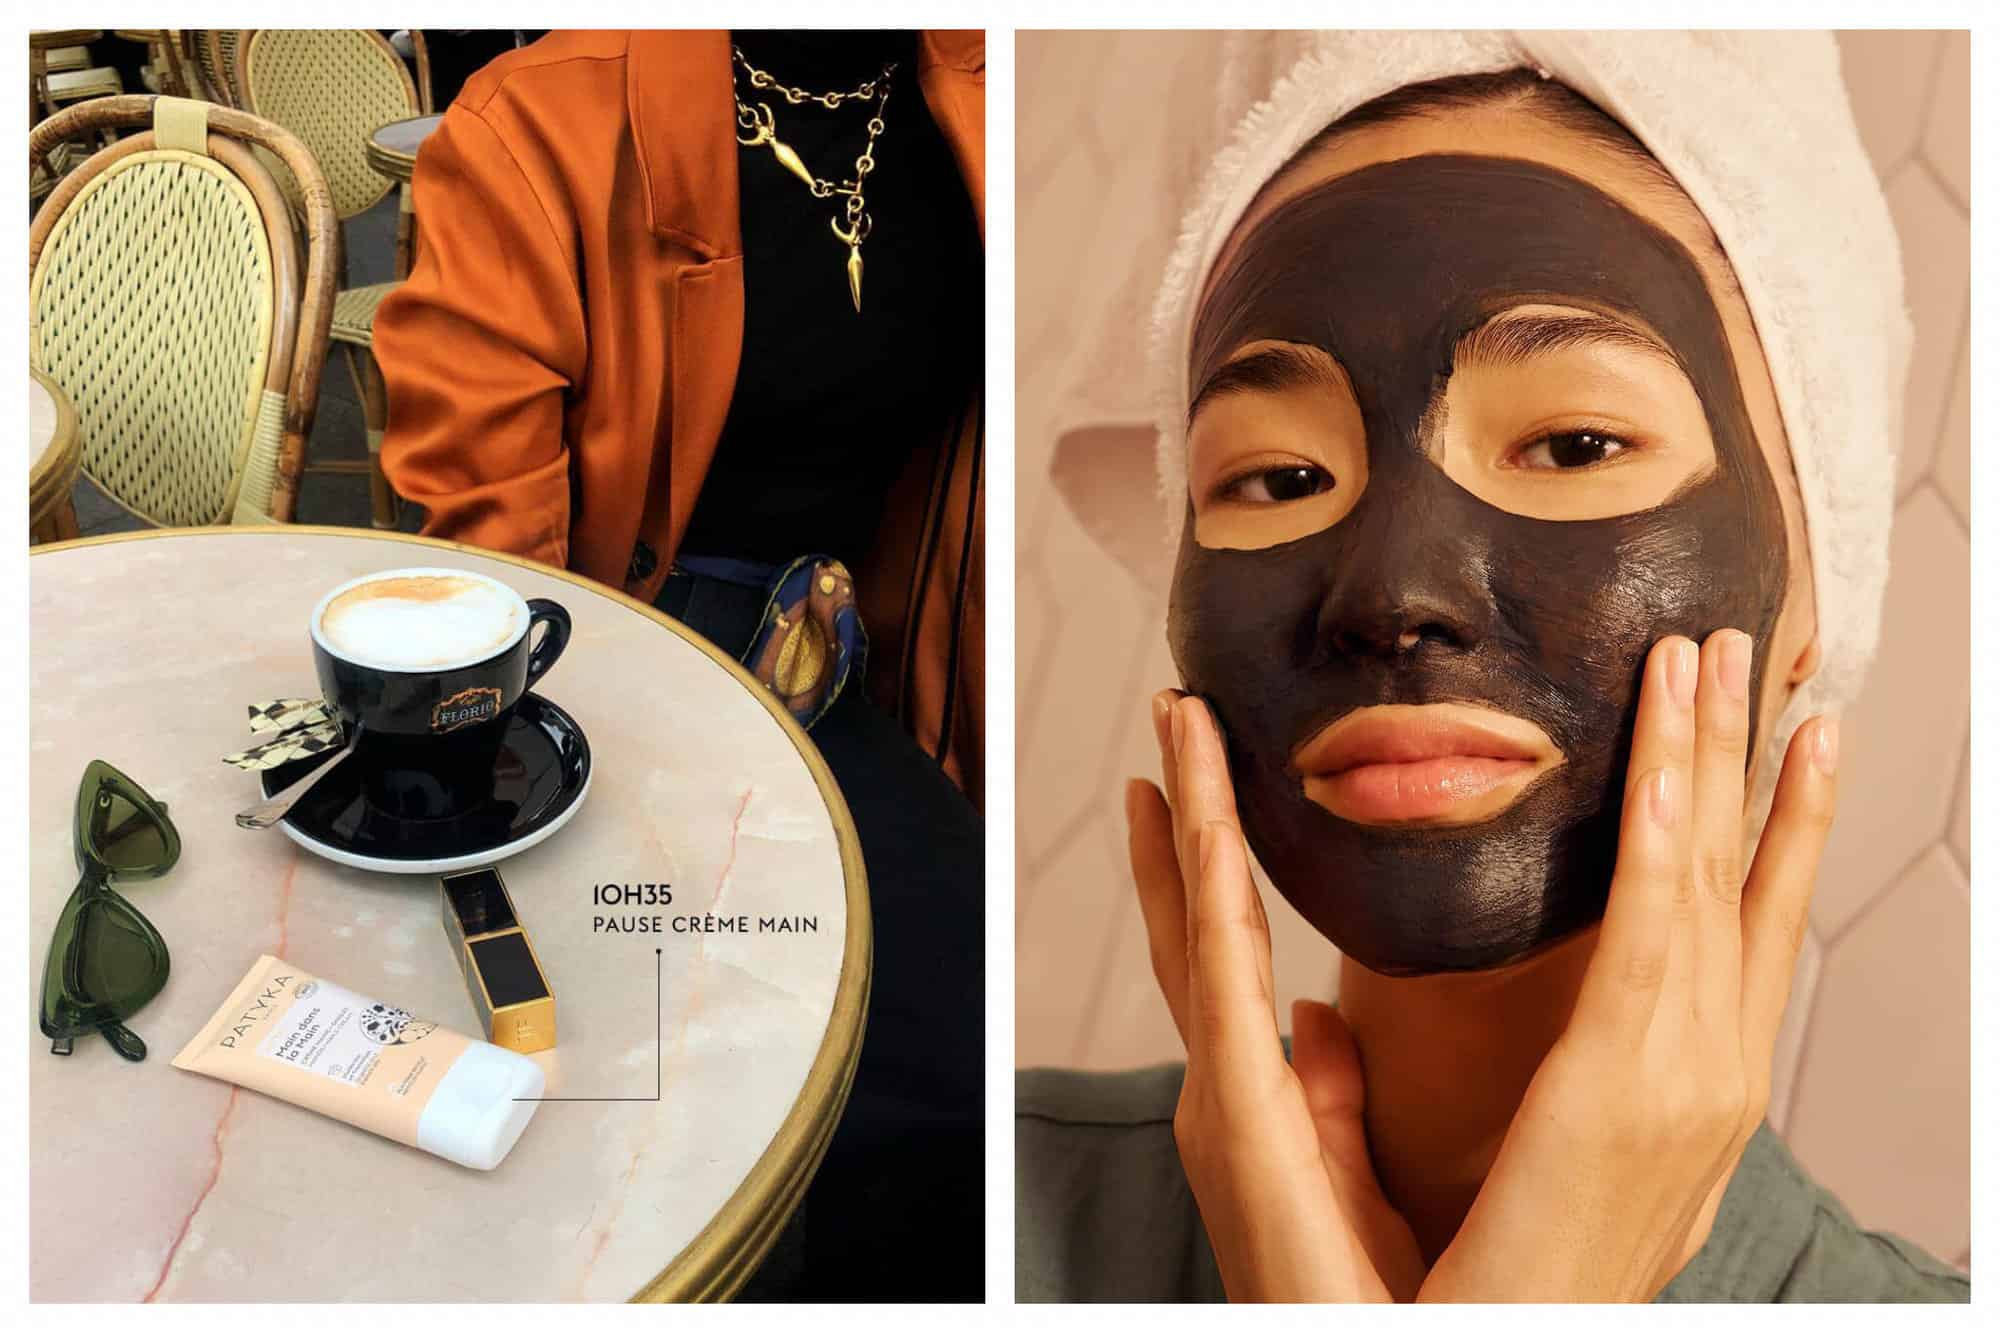 Left: a woman in a burnt orange blazer sitting on a Parisian terrasse with a coffee, lipstick, sunglasses and a PATYKA hand cream on the table. Right: a woman in a bathroom with her hair in a towel and a face mask on by PATYKA.